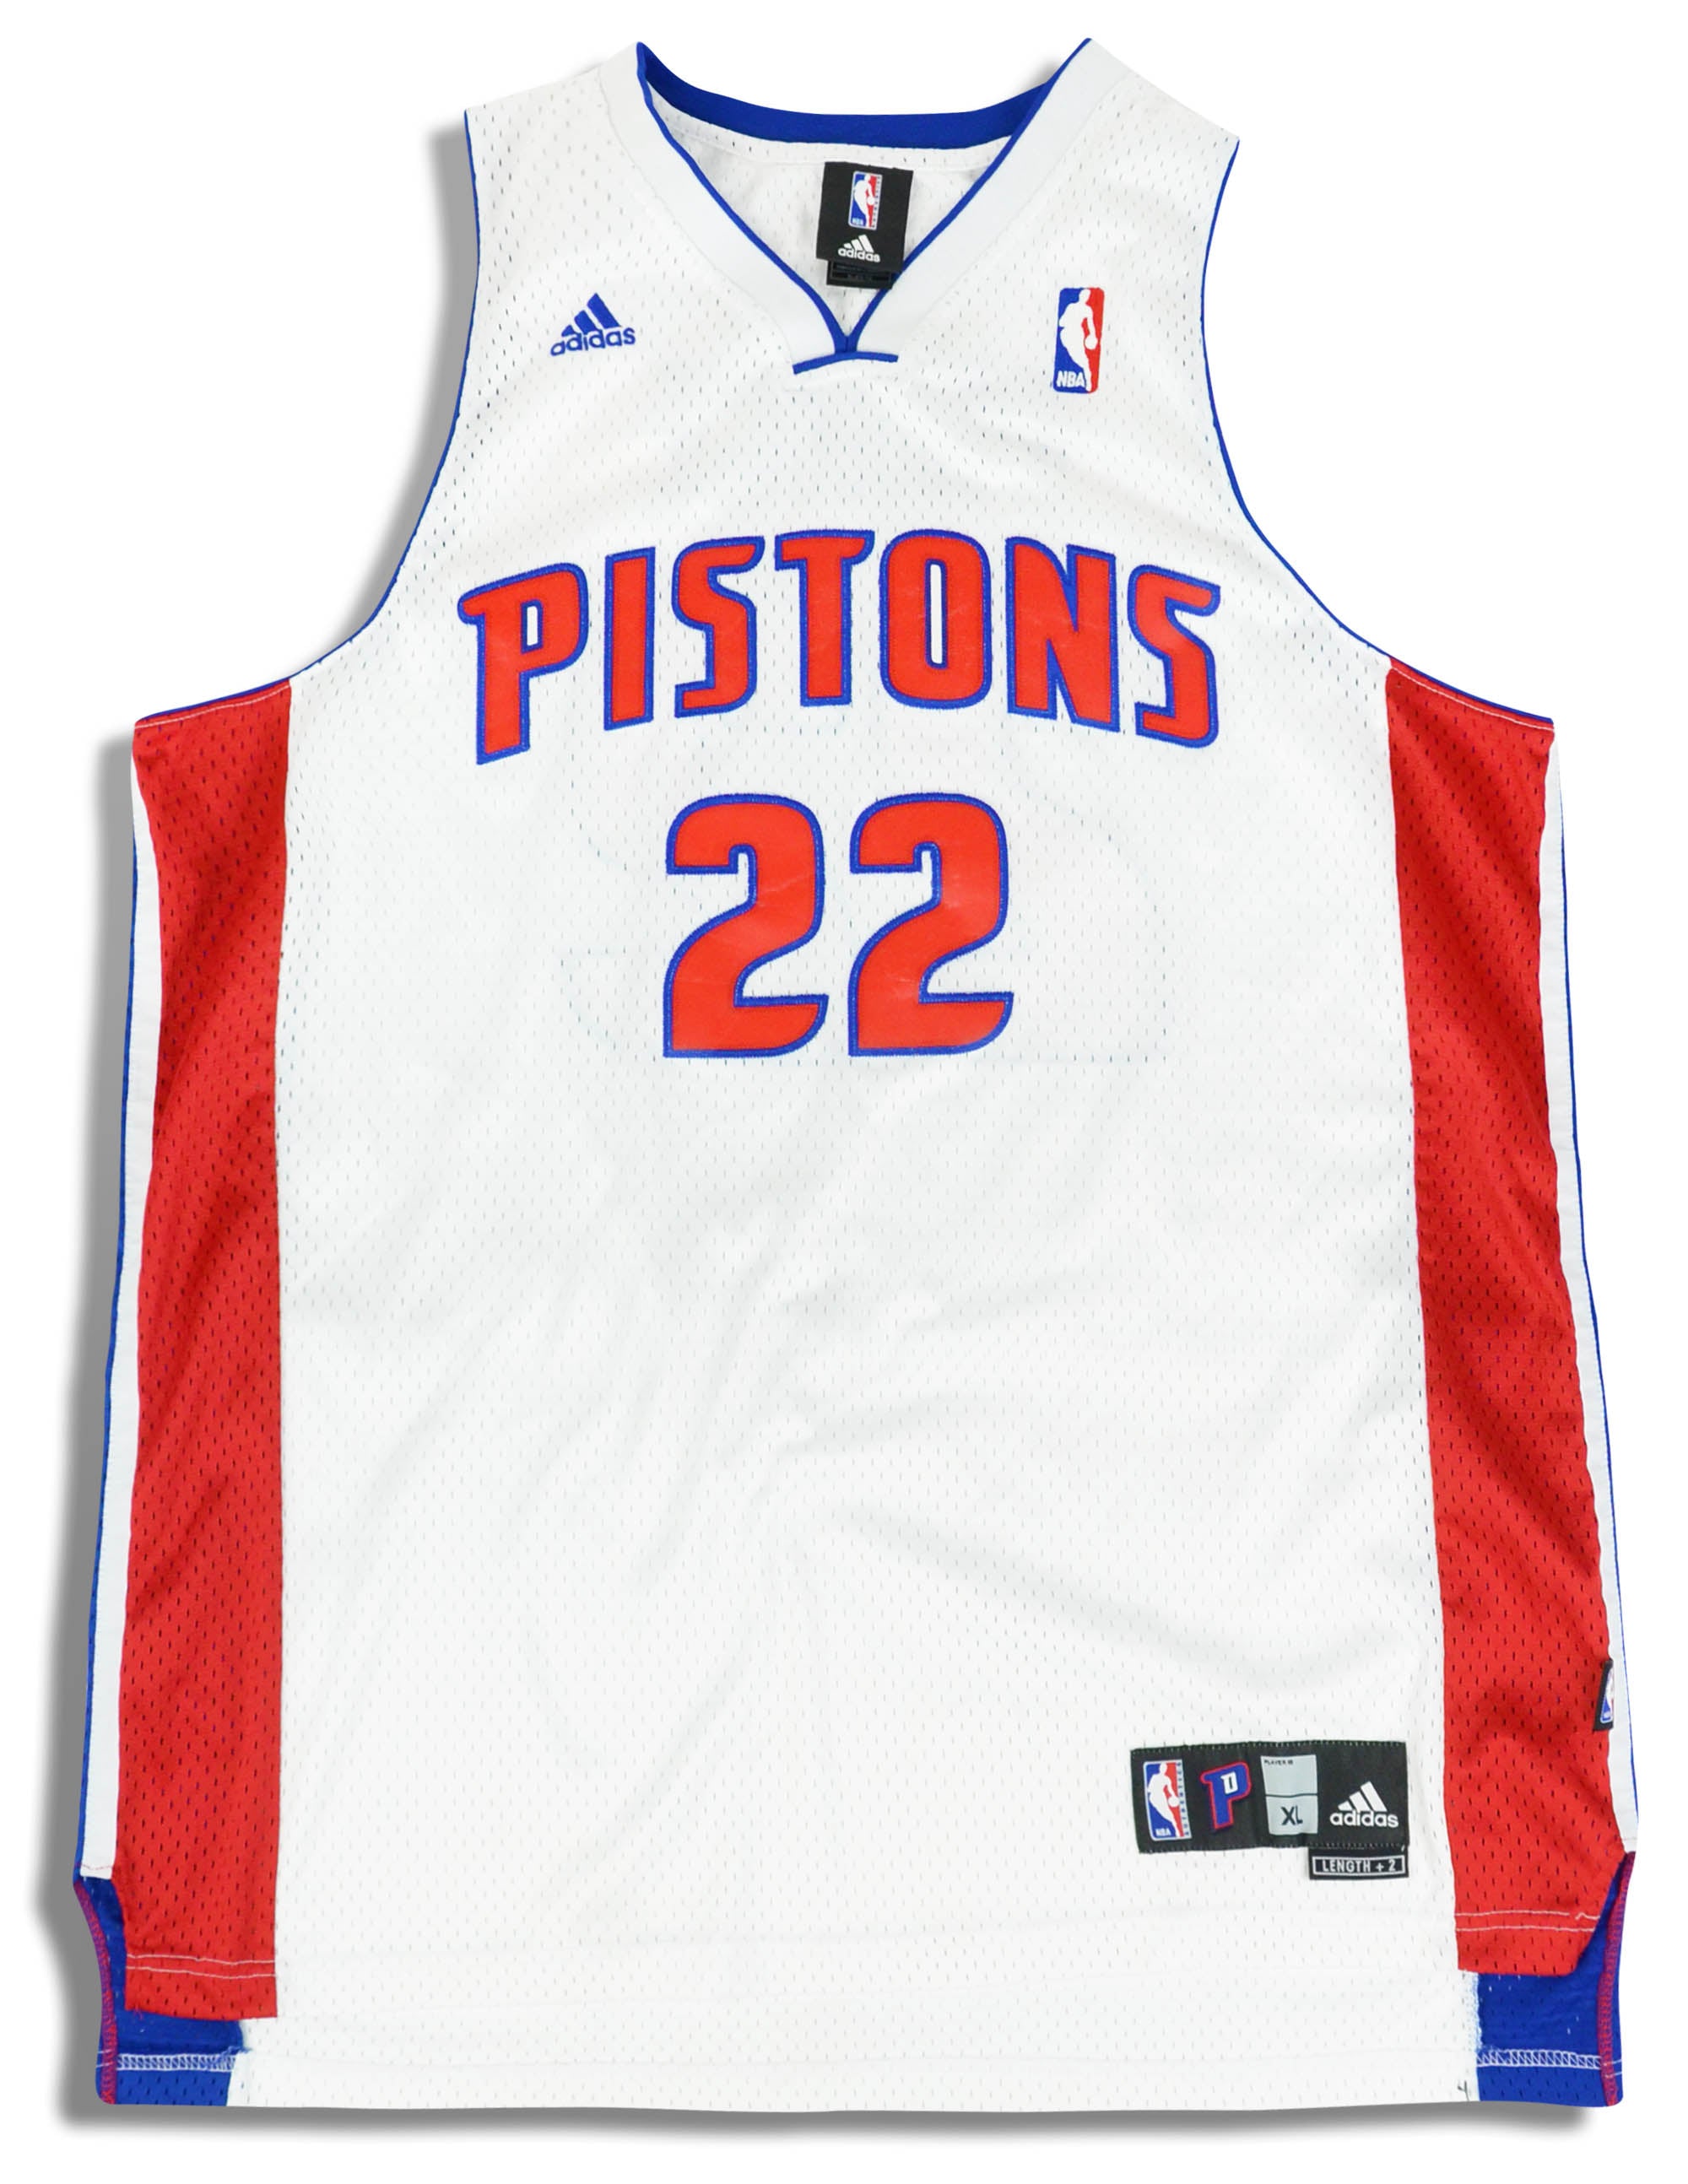 1996-00 Detroit Pistons Hill #33 Champion Home Jersey (Very